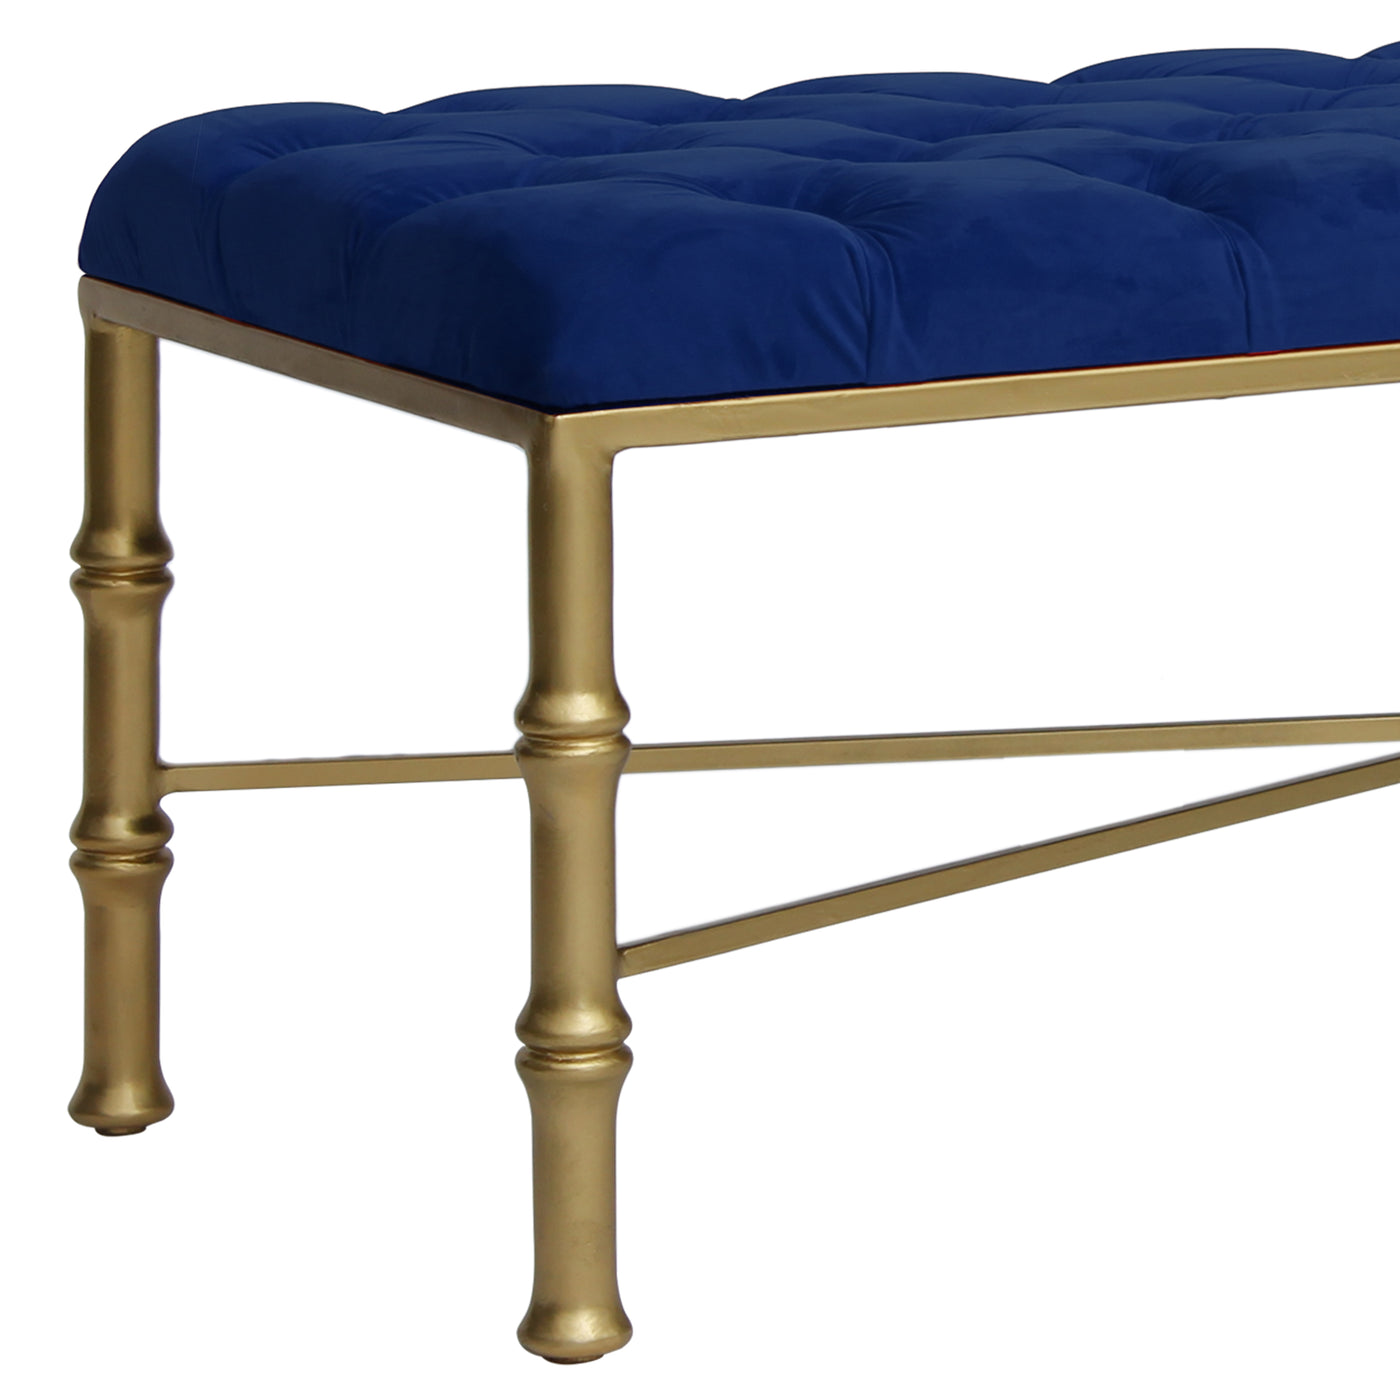 Close up of a unique metal bench with bamboo styled legs, topped with a navy blue tufted cushion